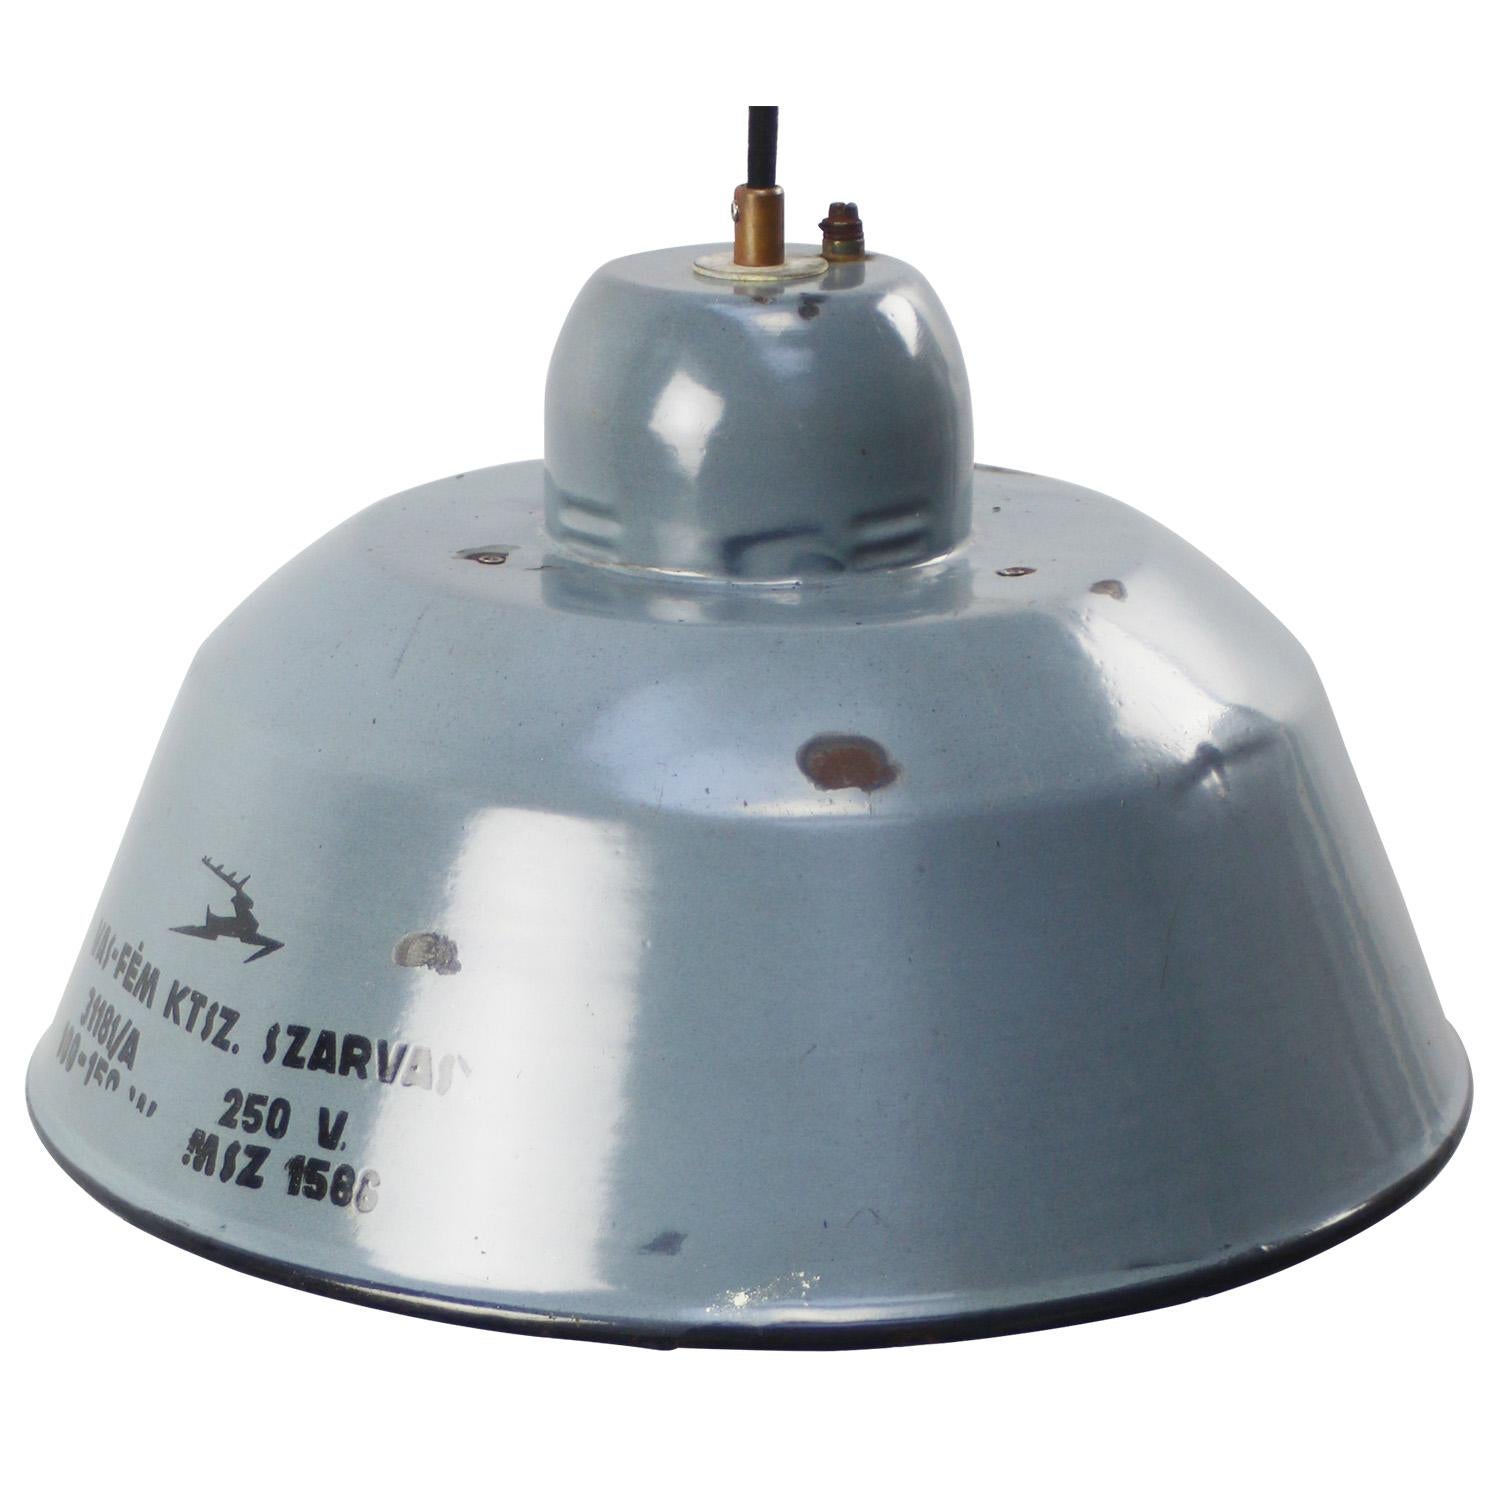 Factory pendant
Blue gray enamel white interior

Weight : 2.50 kg / 5.5 lb

Priced per individual item. All lamps have been made suitable by international standards for incandescent light bulbs, energy-efficient and LED bulbs. E26/E27 bulb holders